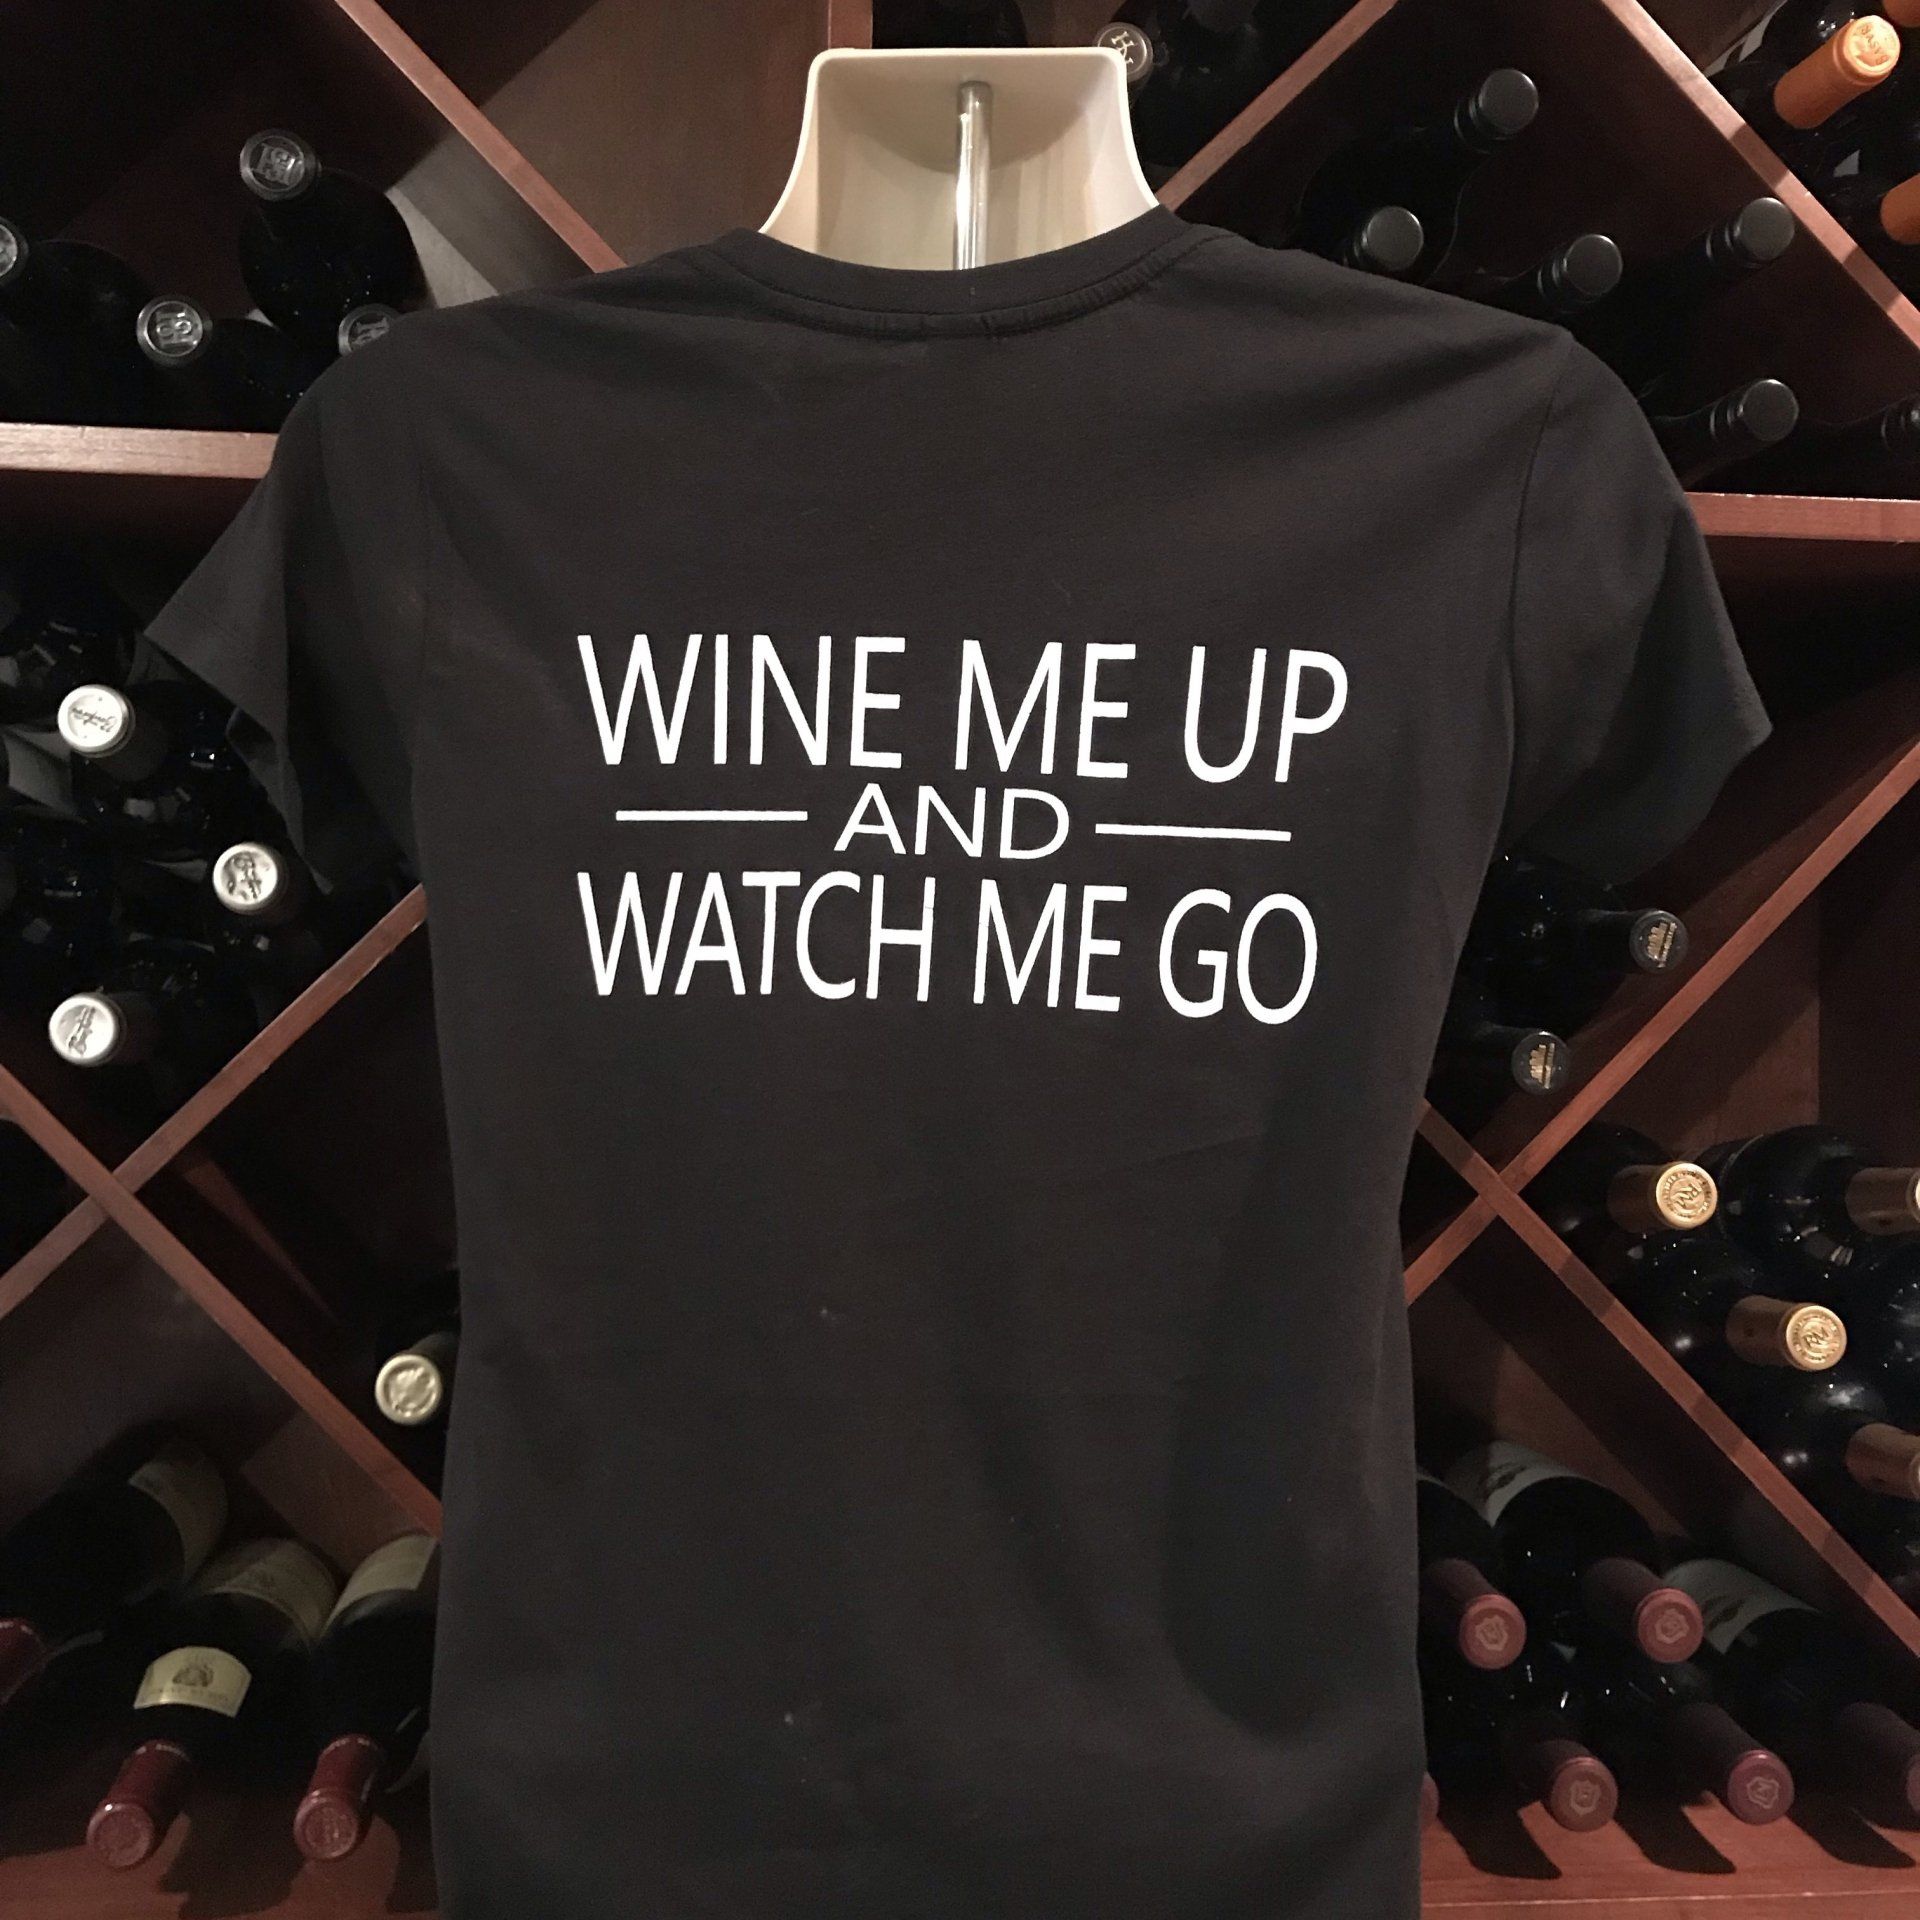 Wine Me Up and Watch Me Go black shirt